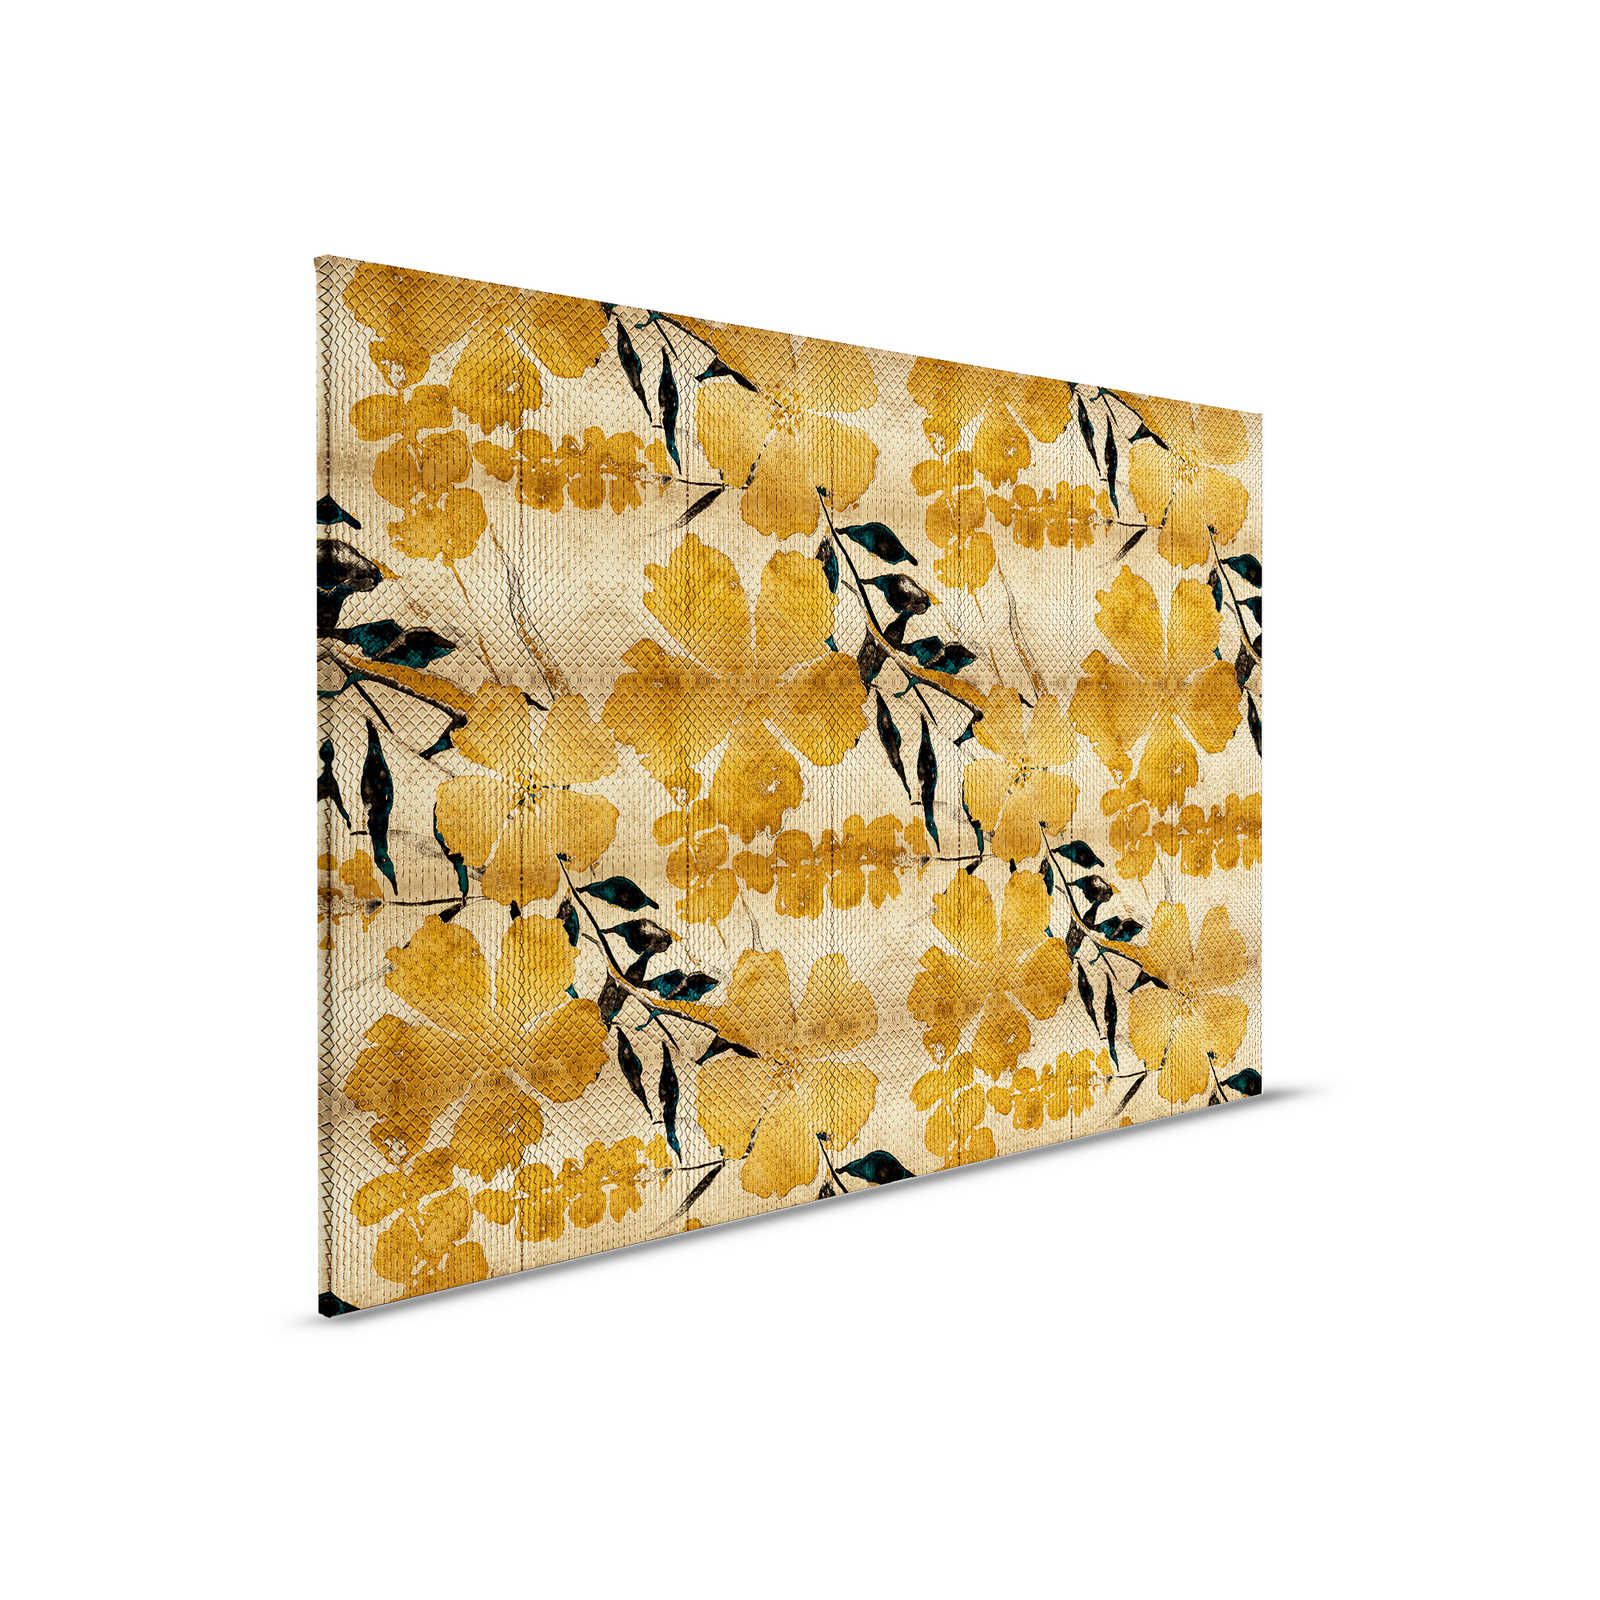 Odessa 1 - Metallic Canvas Painting with Cherry Blossom Pattern in Gold - 0.90 m x 0.60 m
